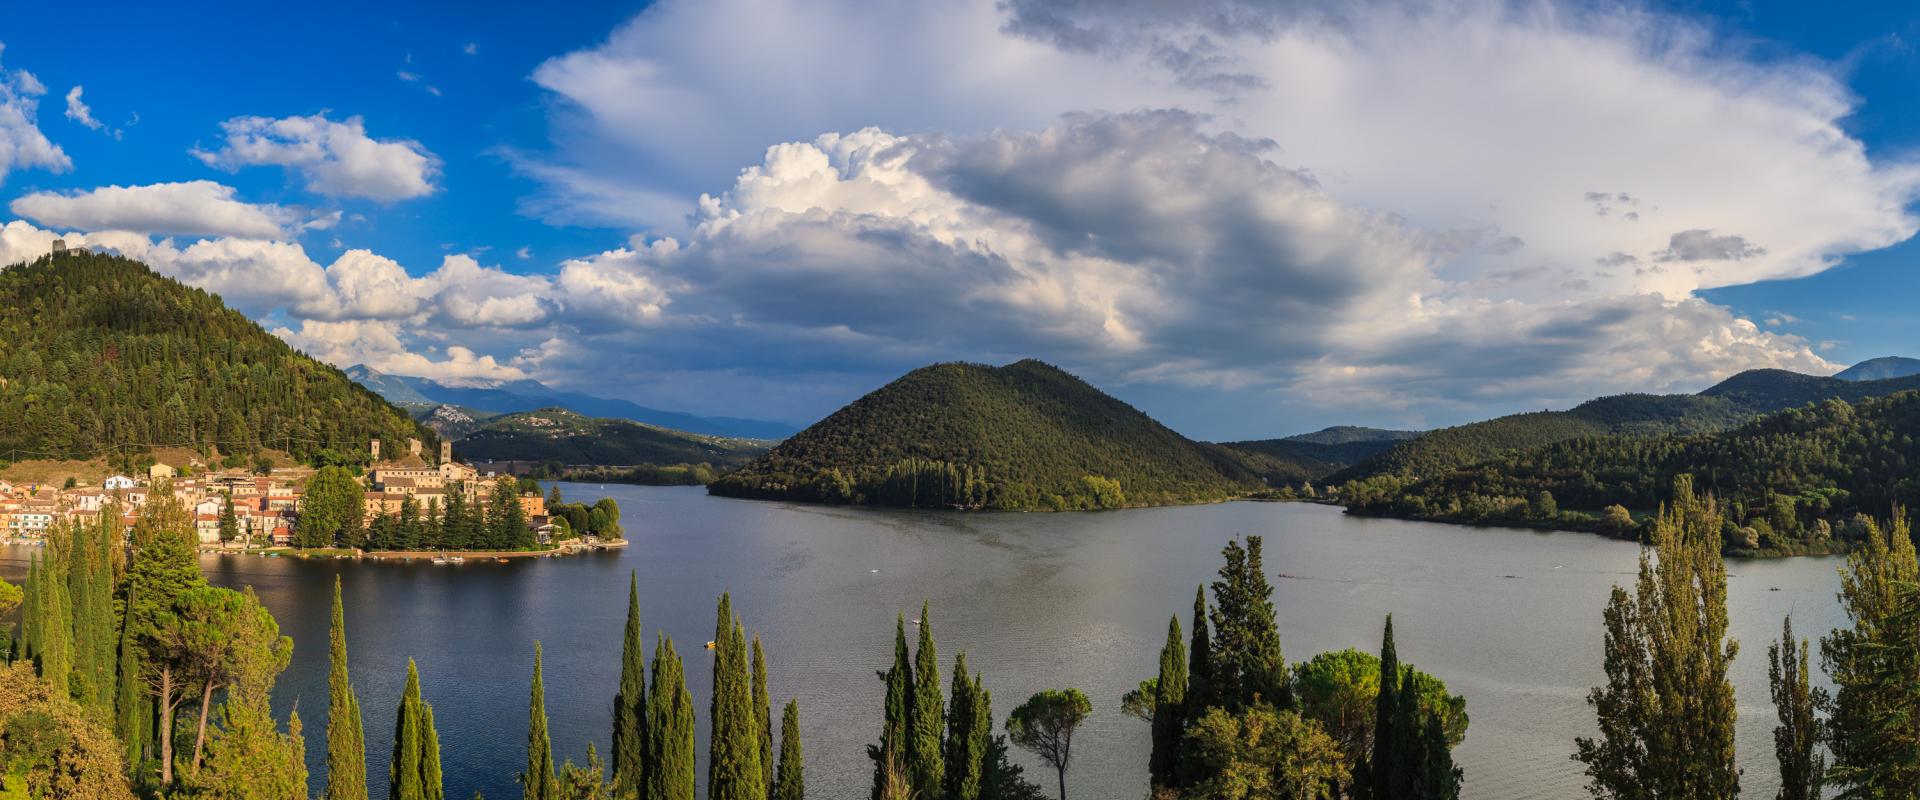 Hiking experience in Piediluco Lake